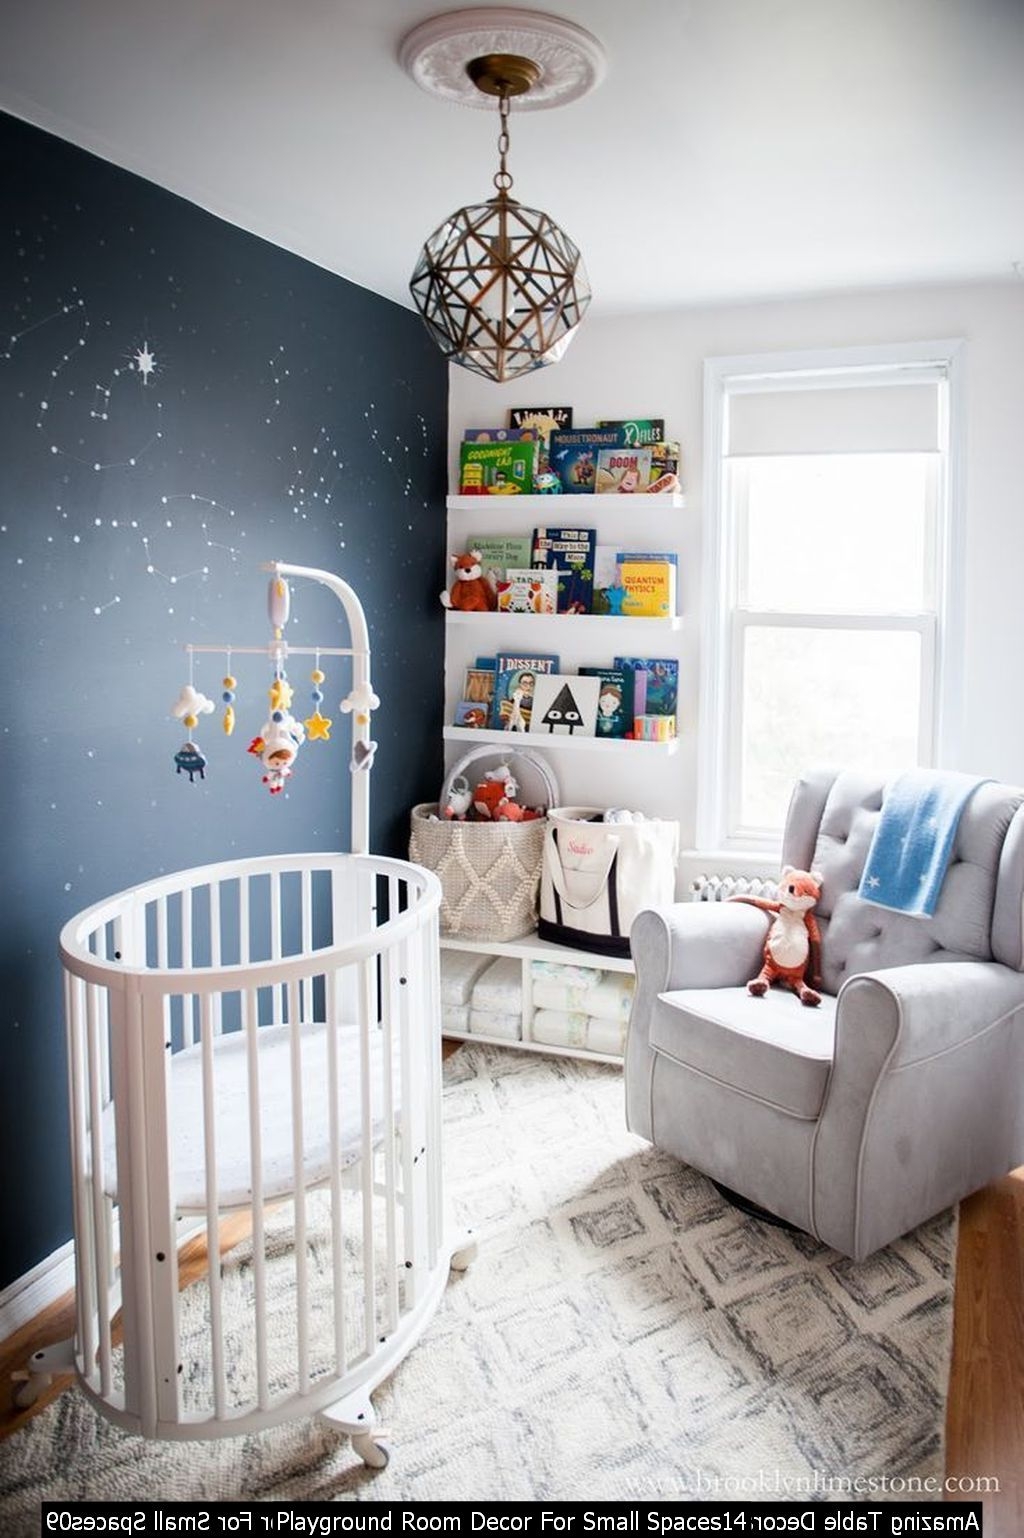 Playground Room Decor For Small Spaces14